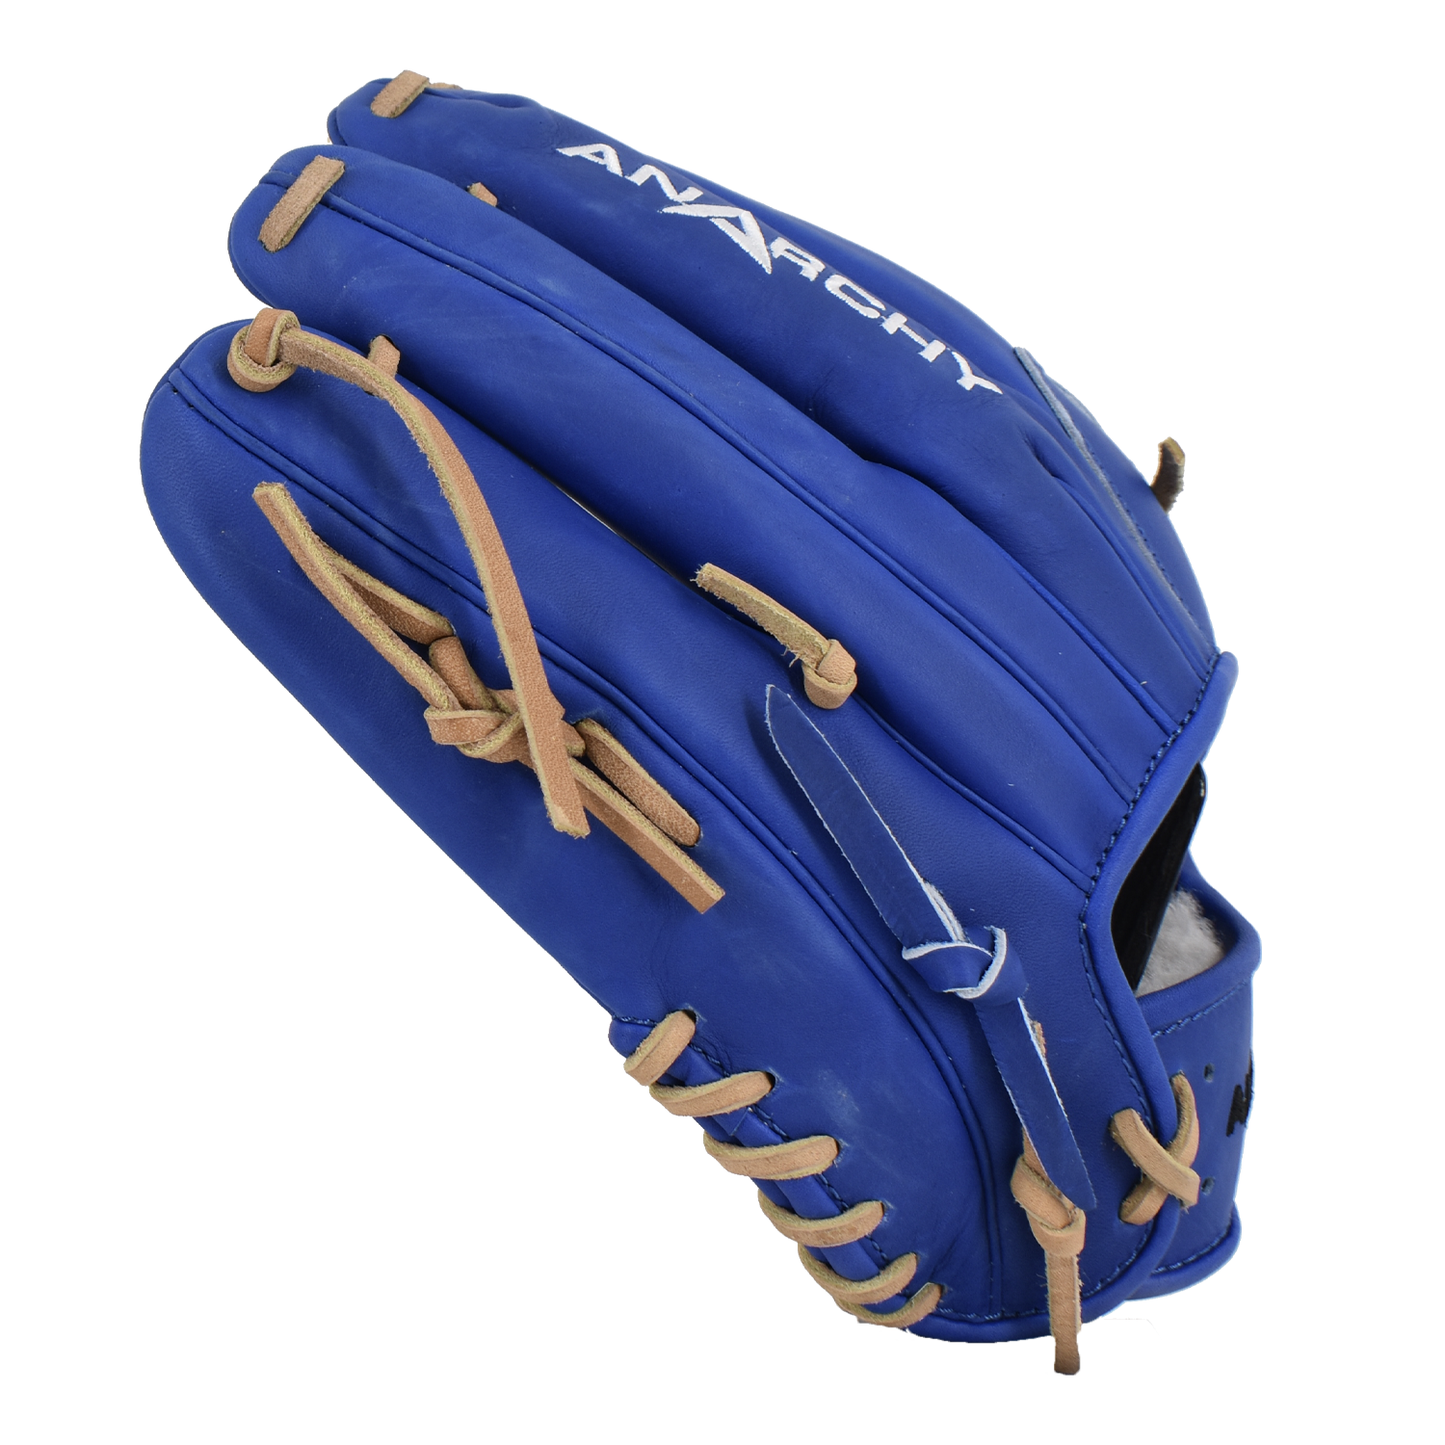 Viper Premium Leather Slowpitch Softball Fielding Glove  Anarchy Edition - VIP-H-RB-CR-006